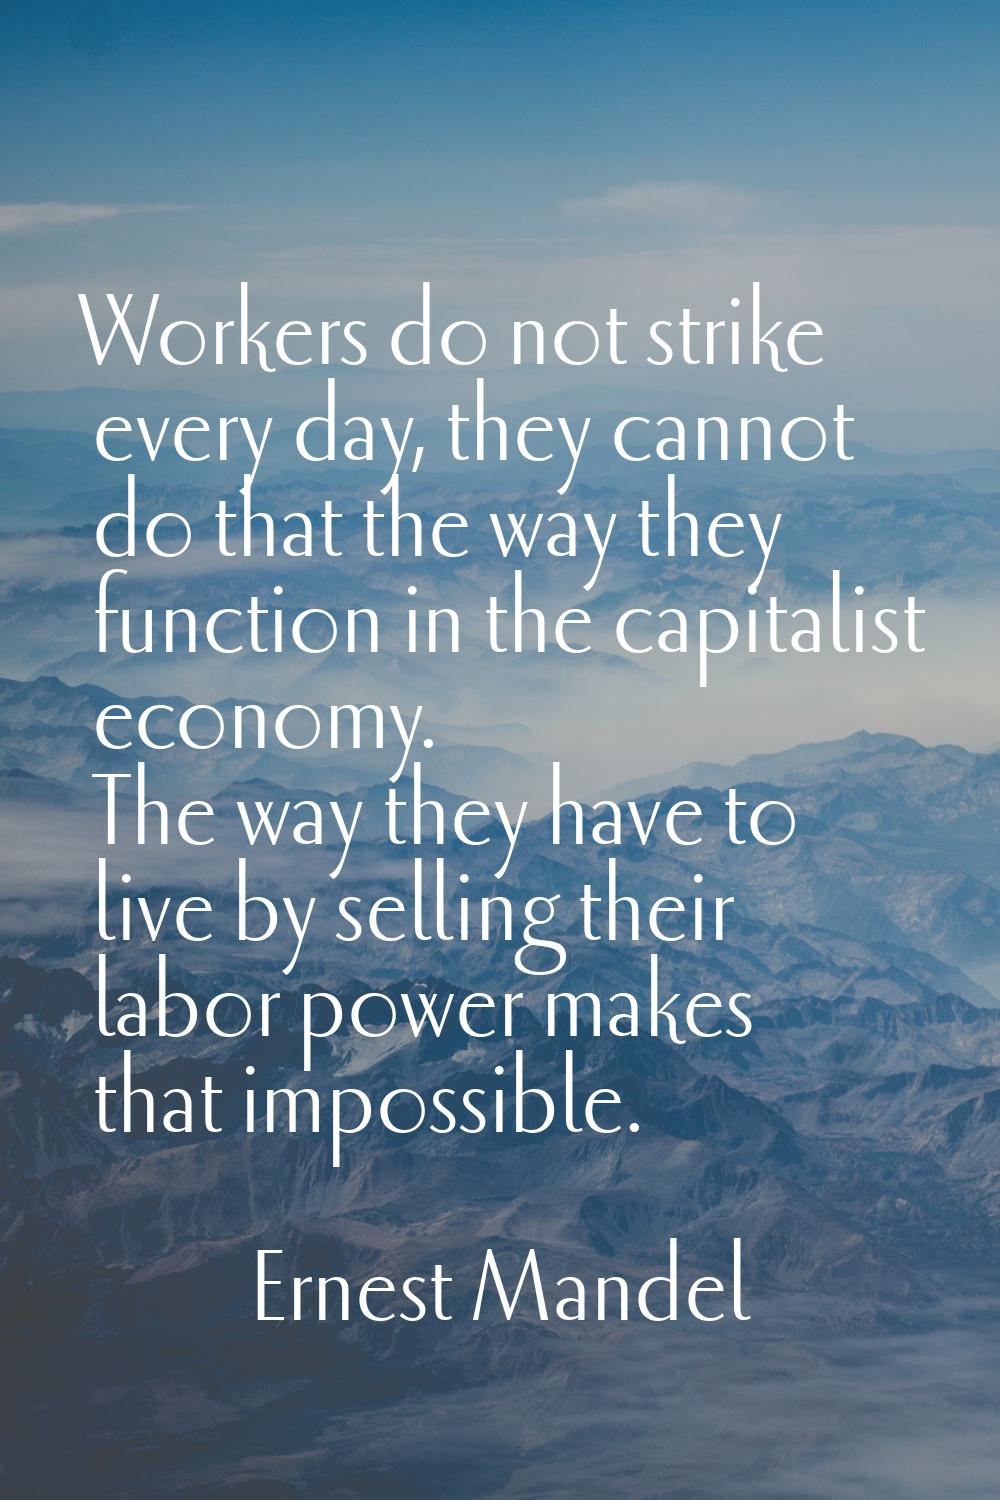 Workers do not strike every day, they cannot do that the way they function in the capitalist econom